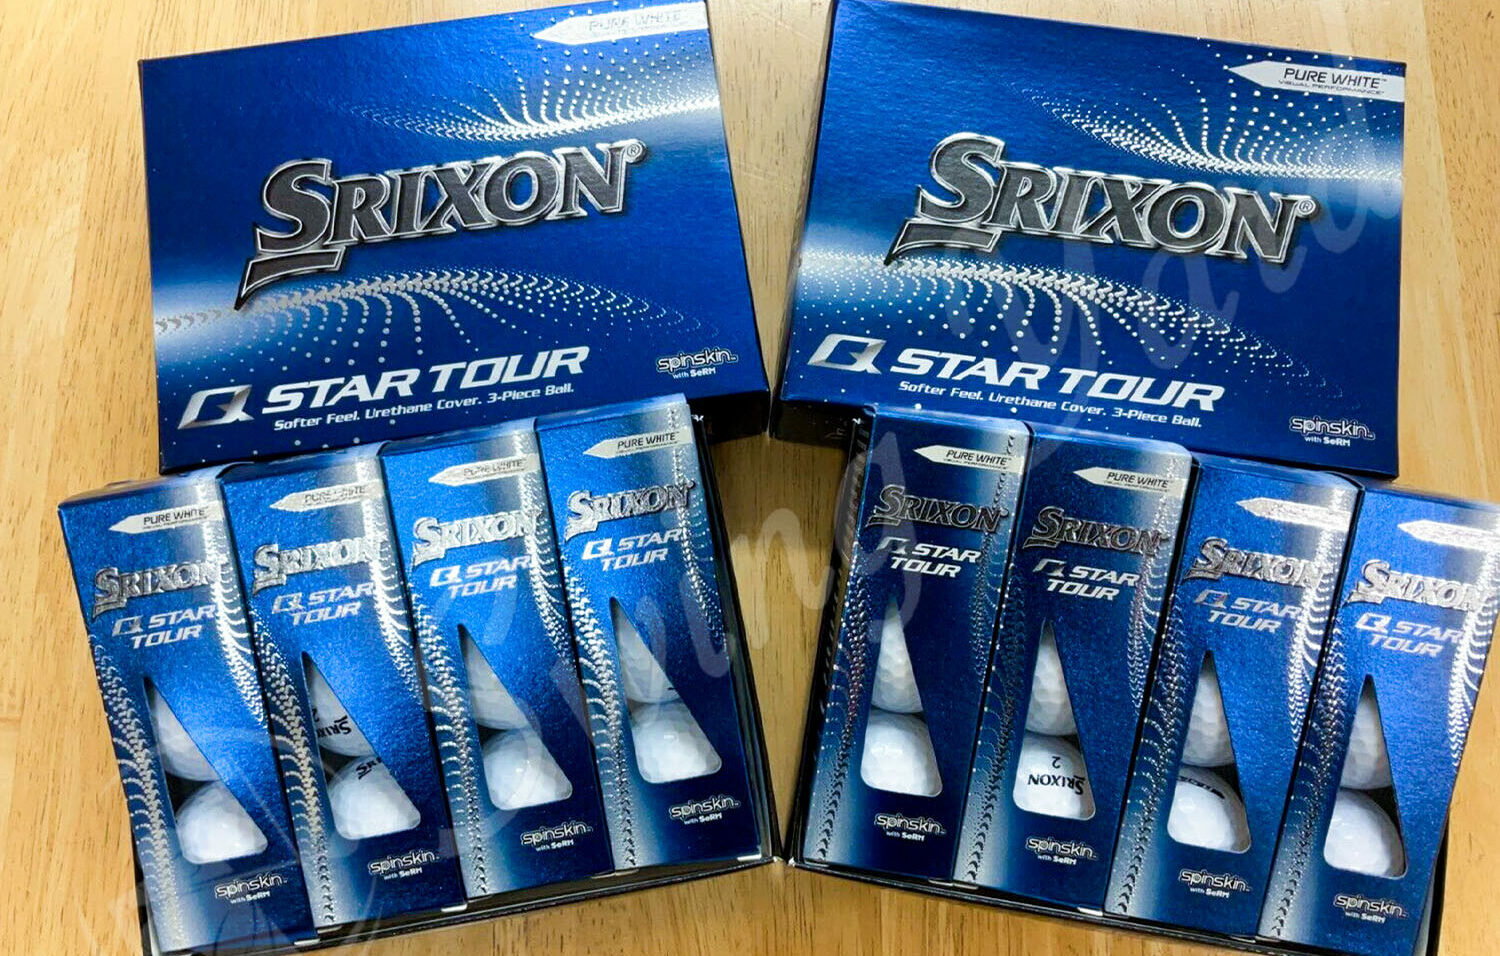 The Srixon Q-Star Tour boxes in the living room